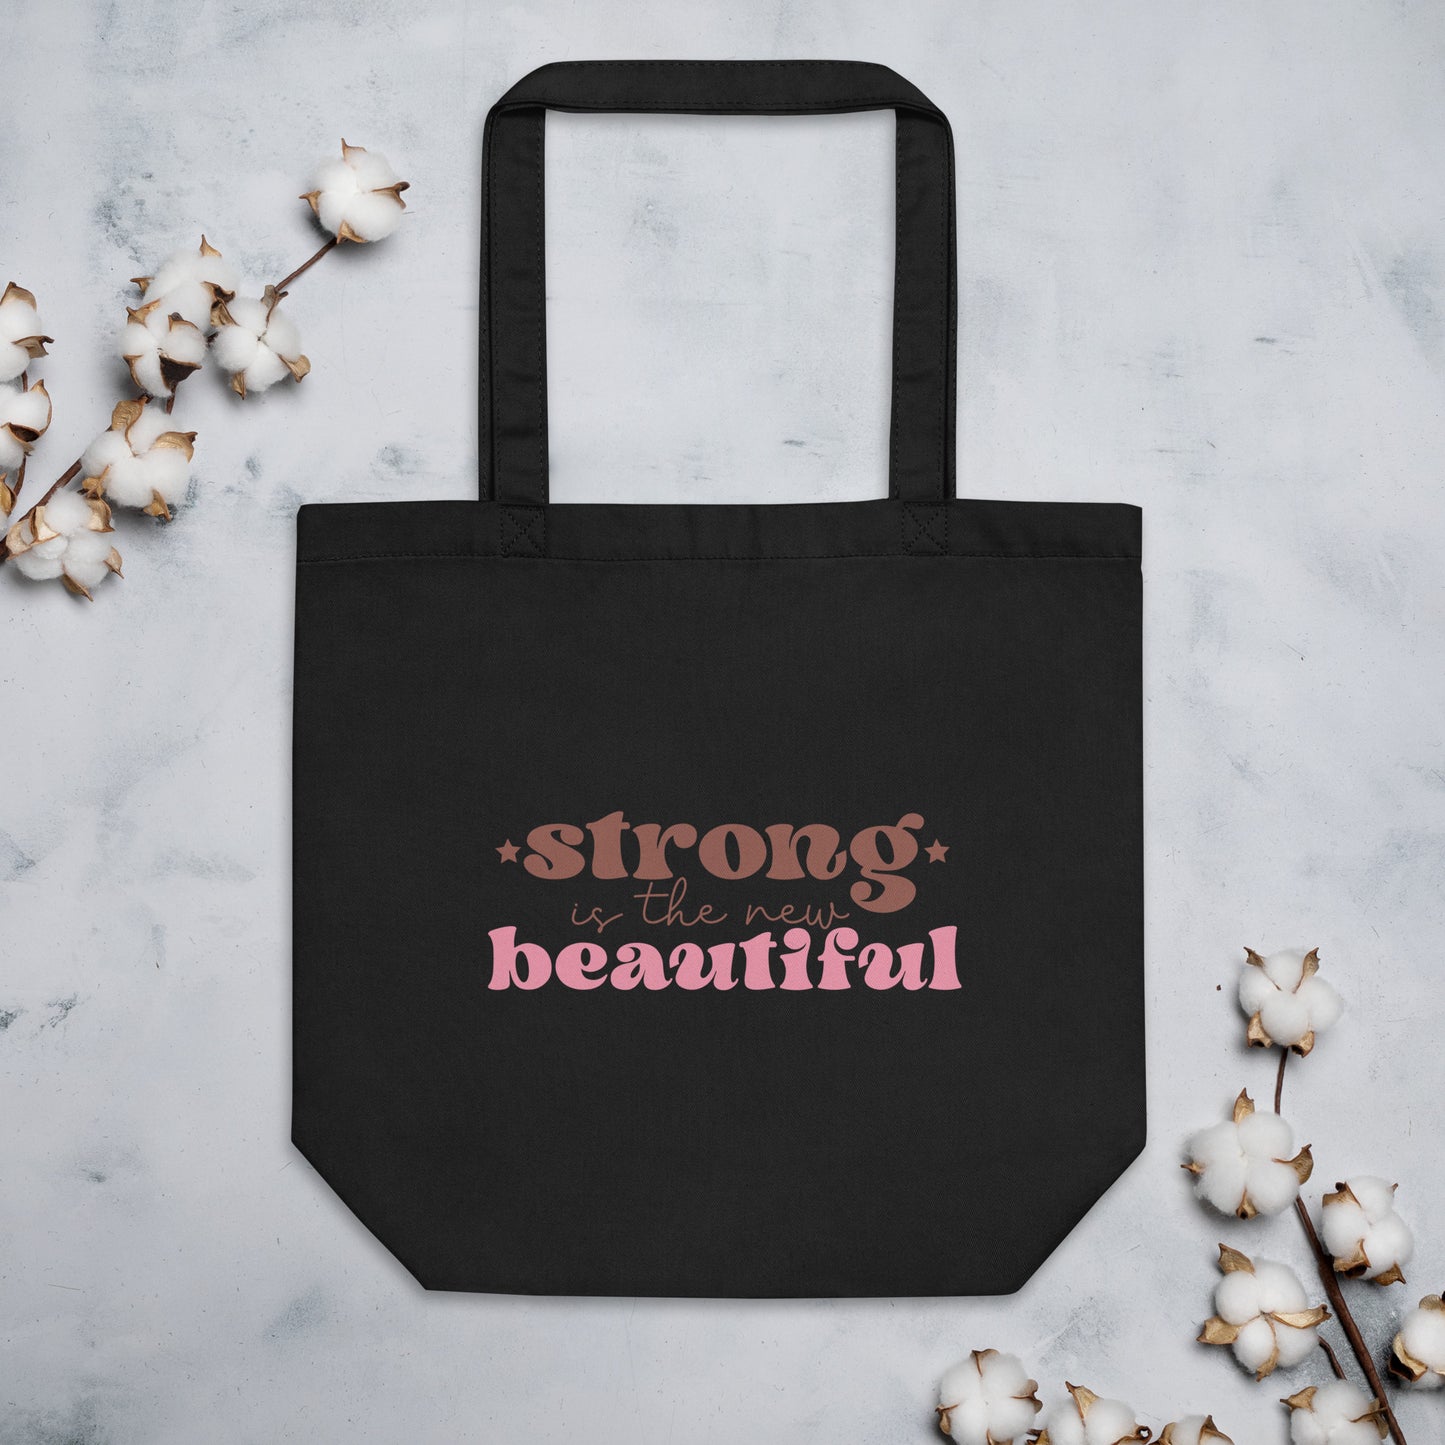 Strong is the New Beautiful Eco Tote Bag